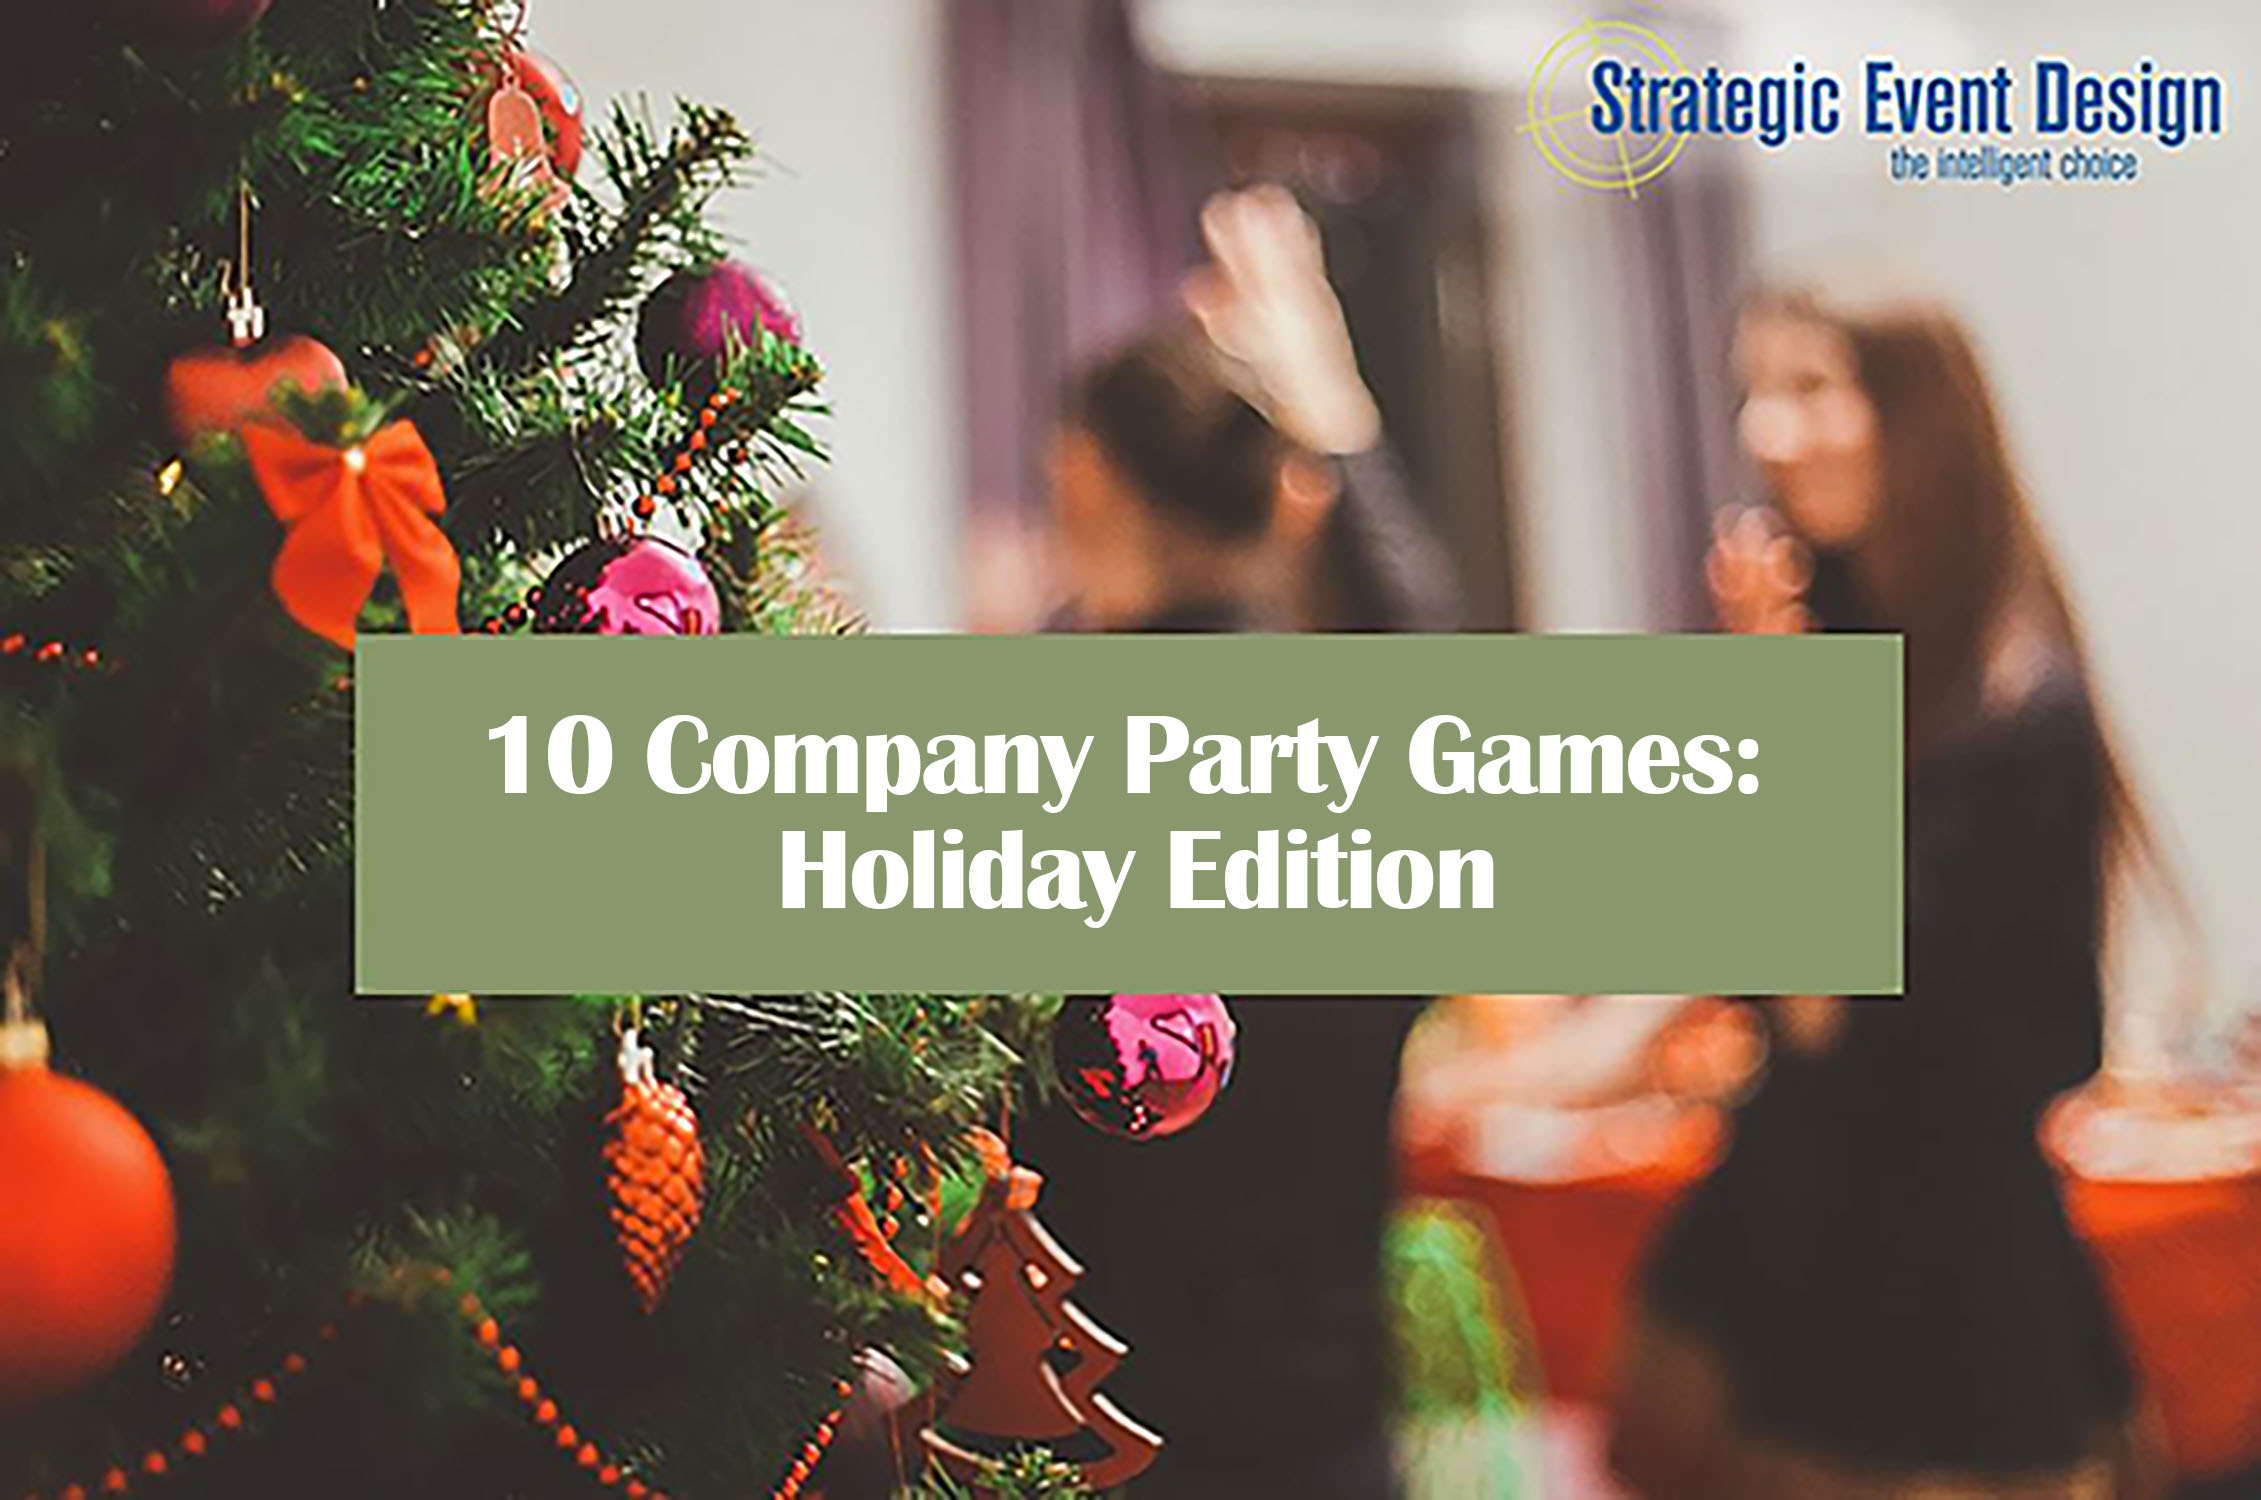 10 Company Party Games: Holiday Edition